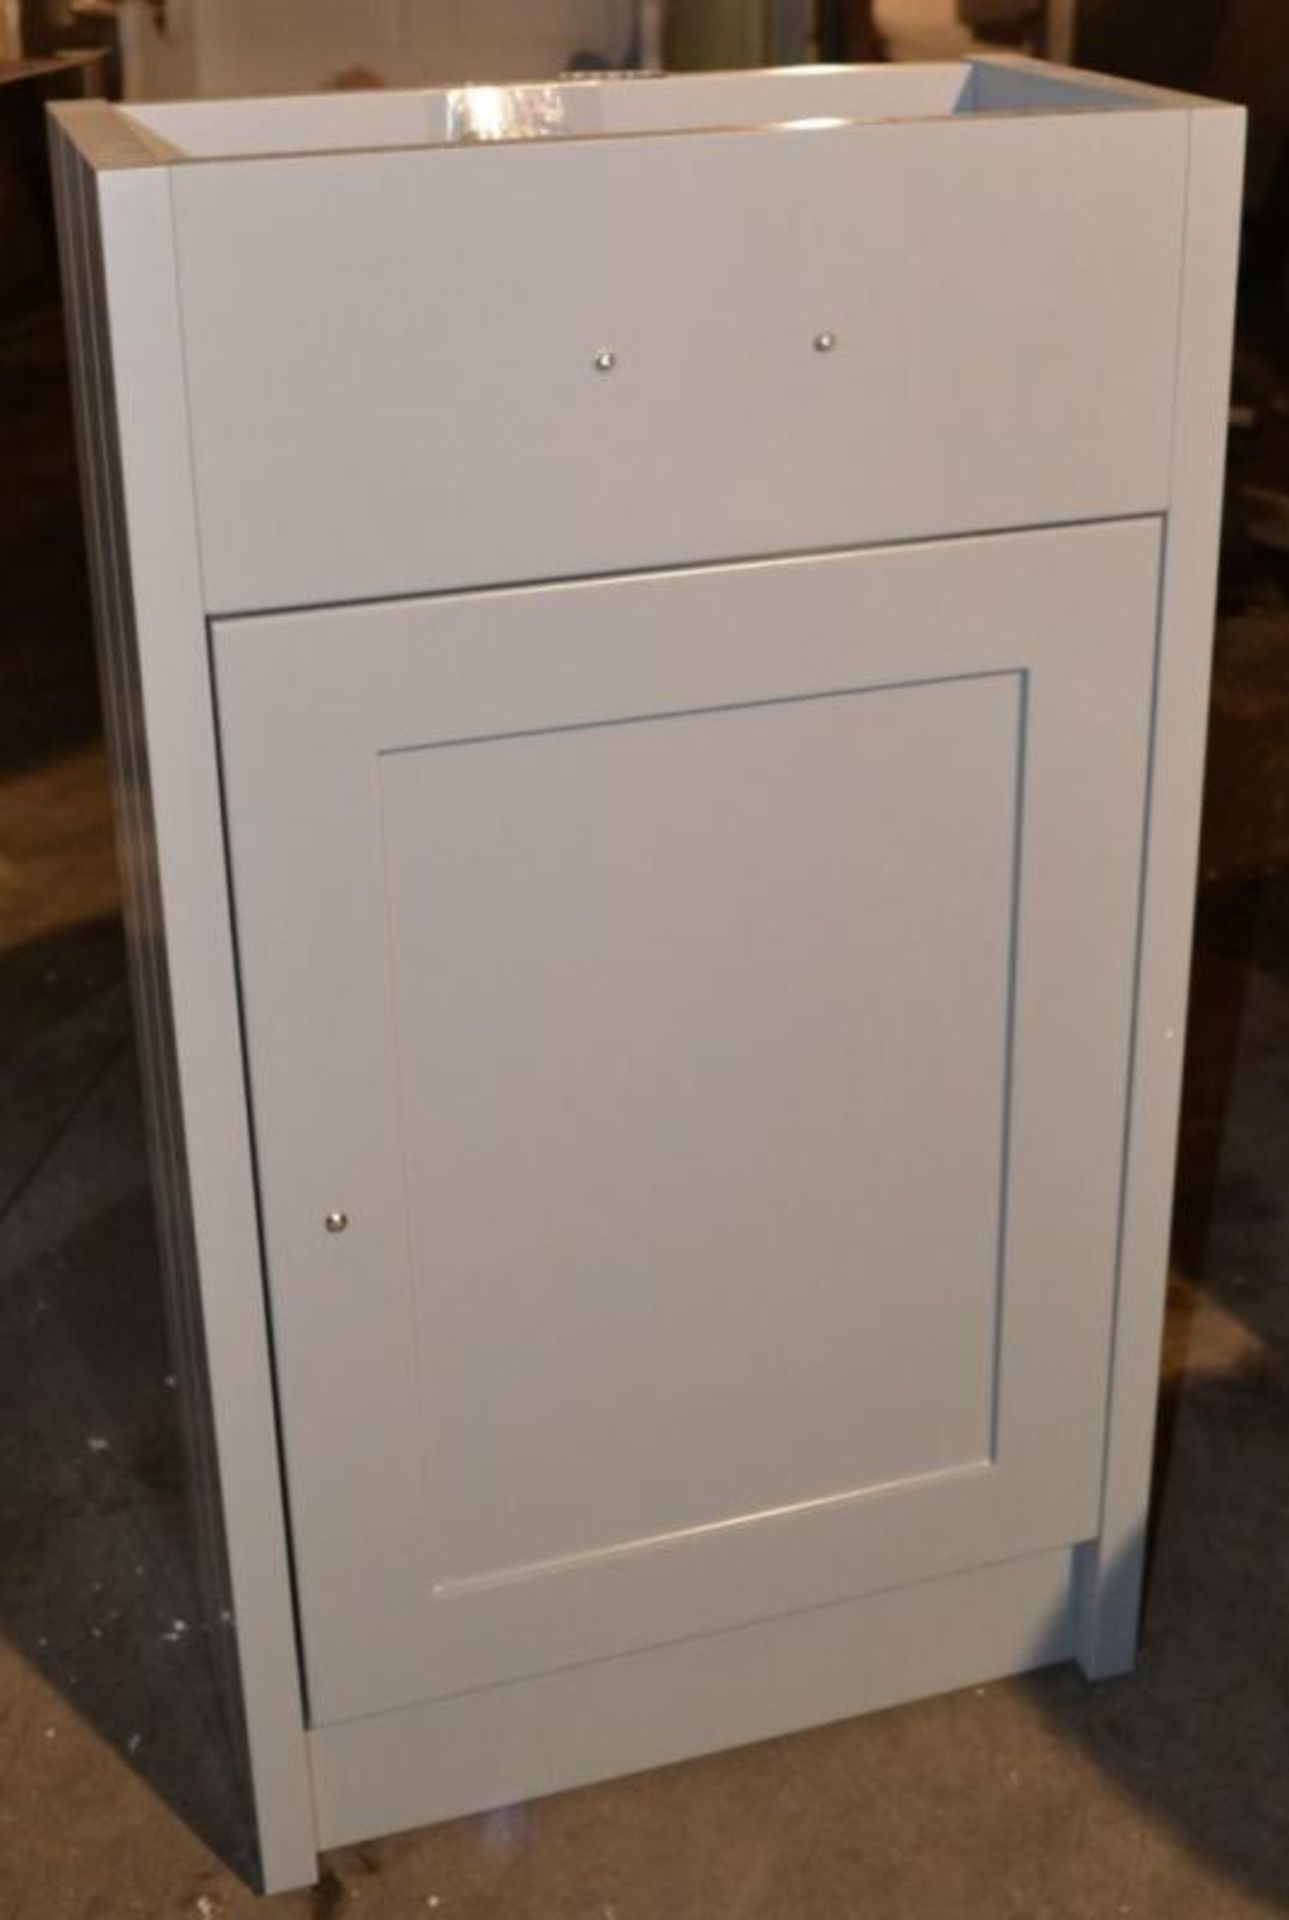 1 x Winchester Grey Cloakroom Vanity Unit In Stone Grey (DULCOMGR) - New / Unused Stock - Dimensions - Image 2 of 4